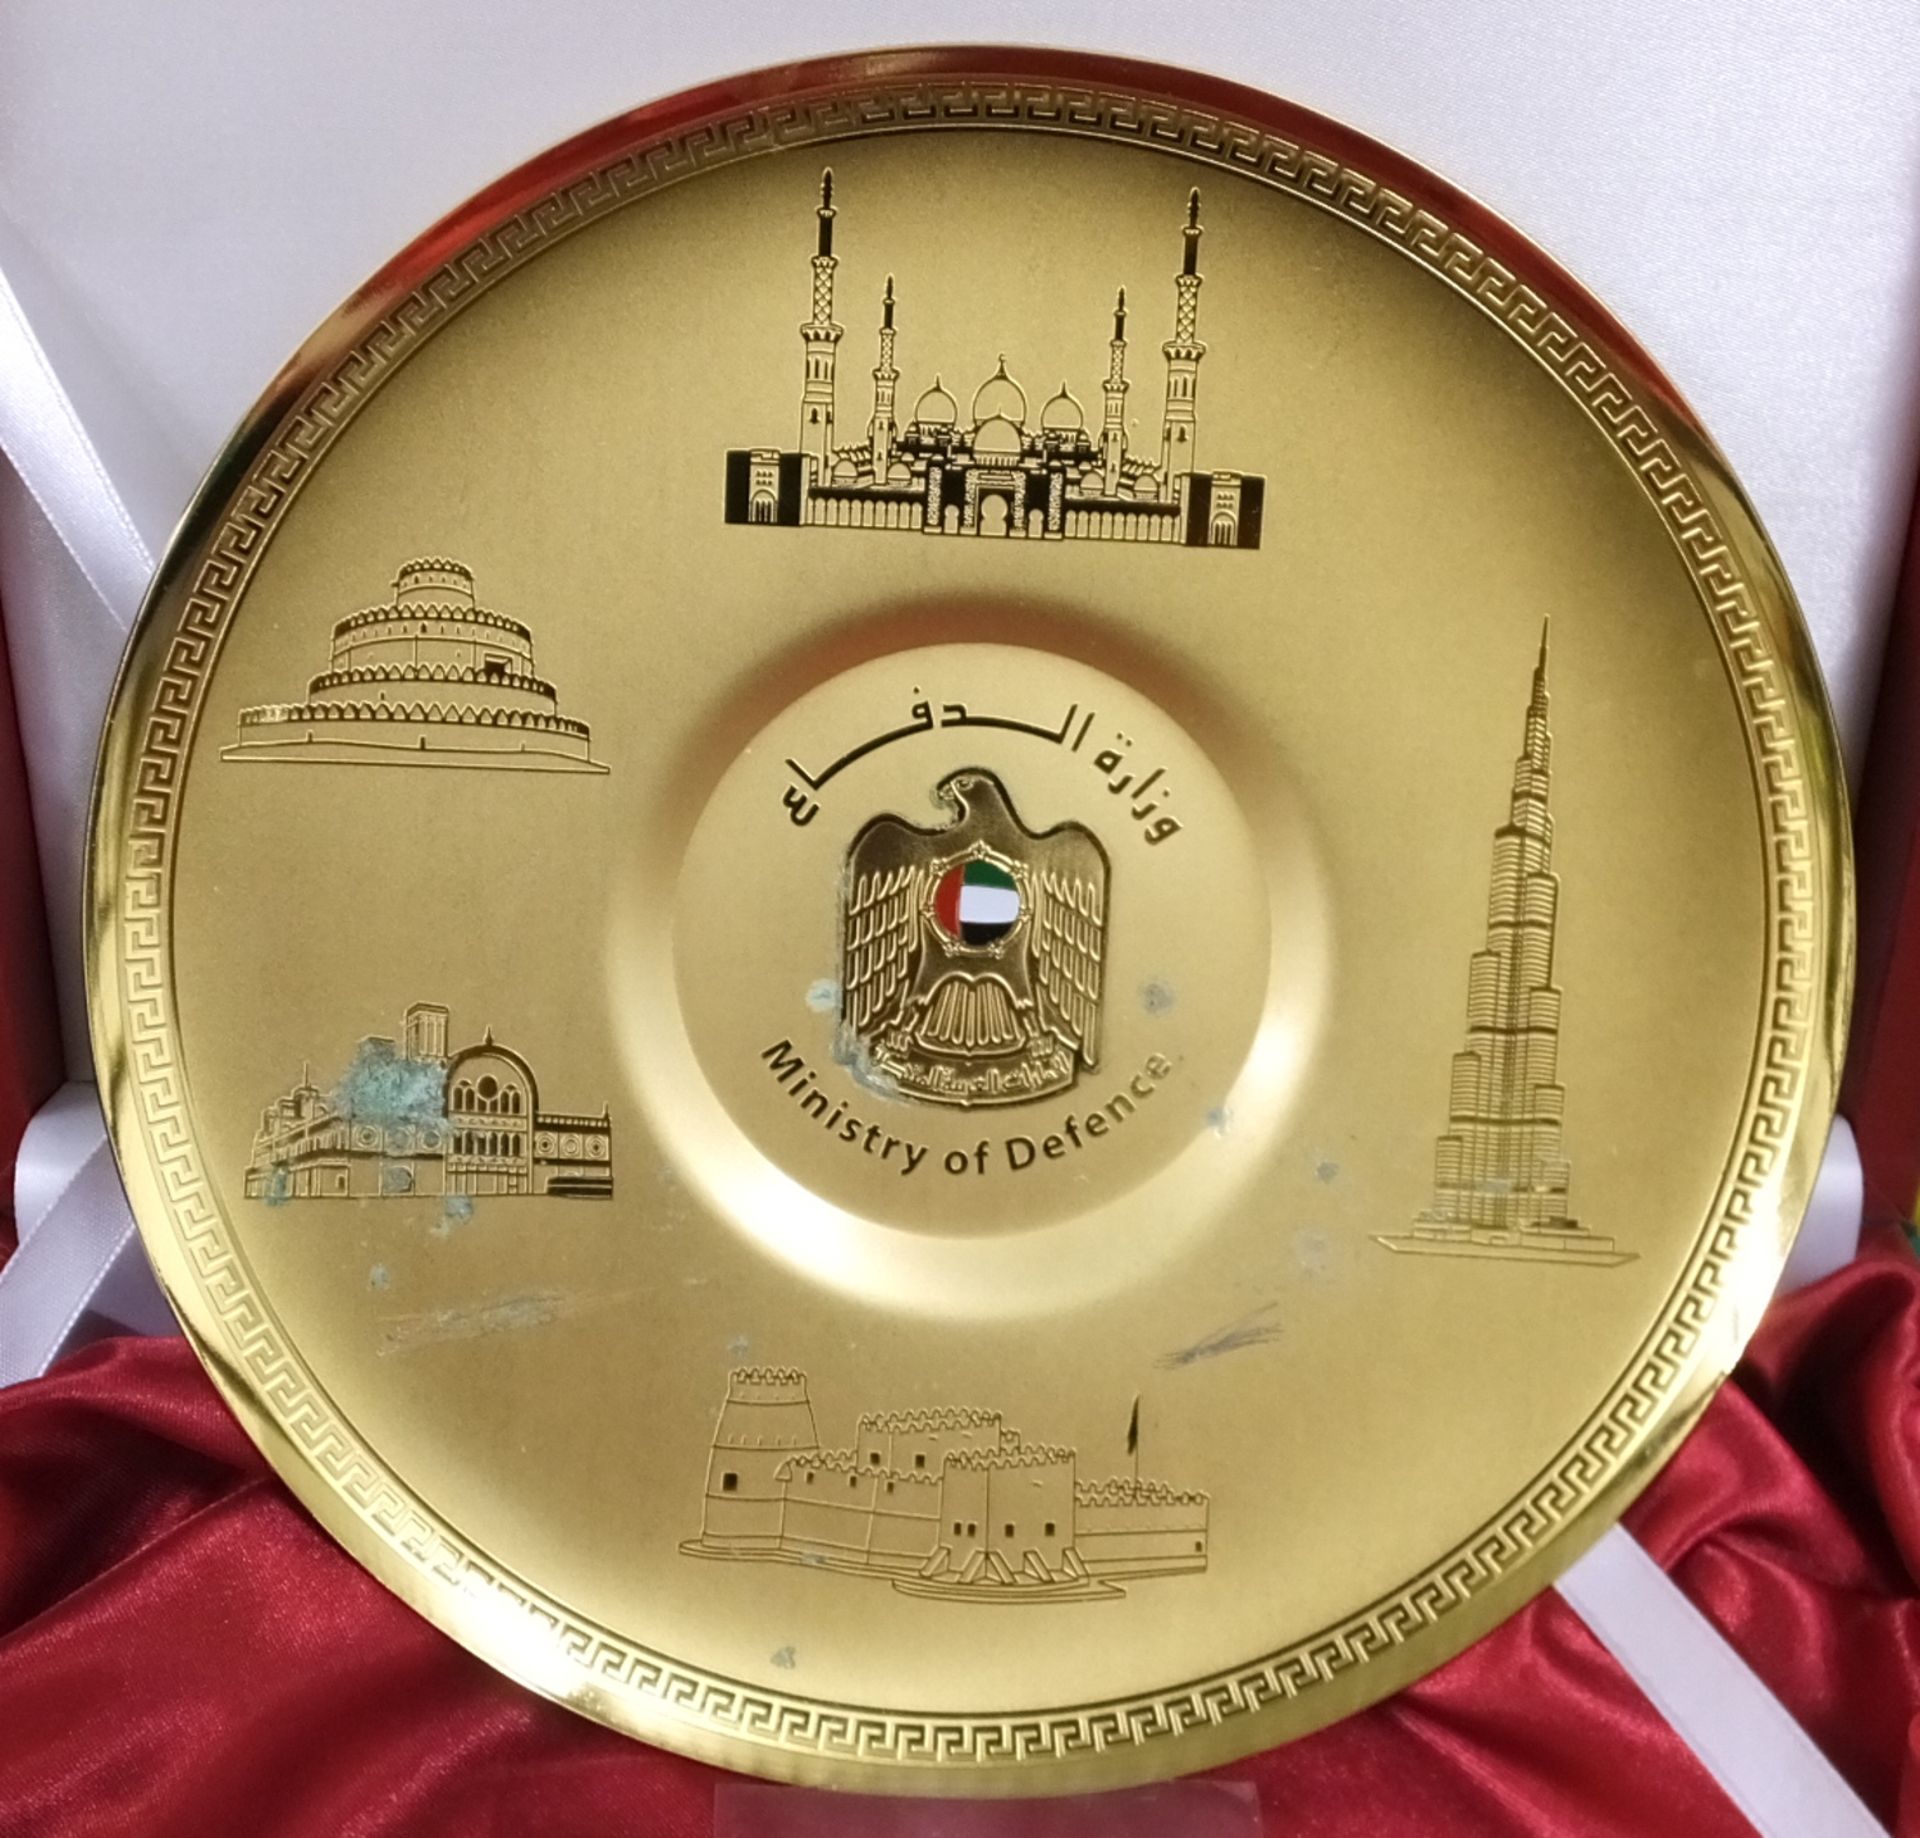 UAE Ministry of Defence Brass Commemorative Plate in Wooden Presentation Box with Nation Emblem